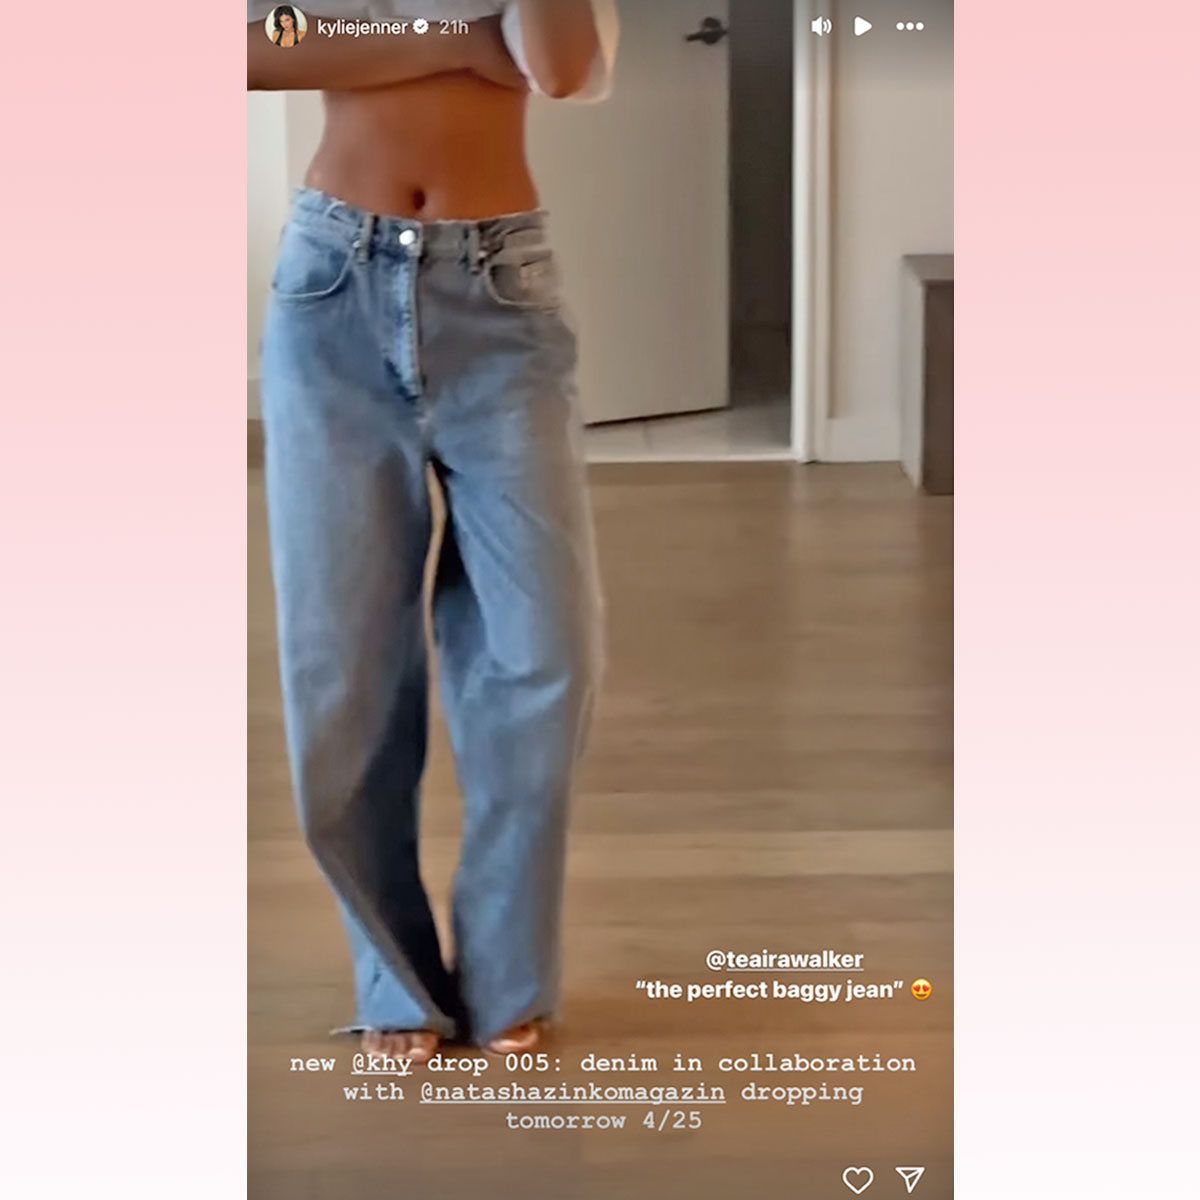 Is Kylie Jenner Subtly Responding To Pregnancy Rumors By Showing Off Her Flat Tummy??